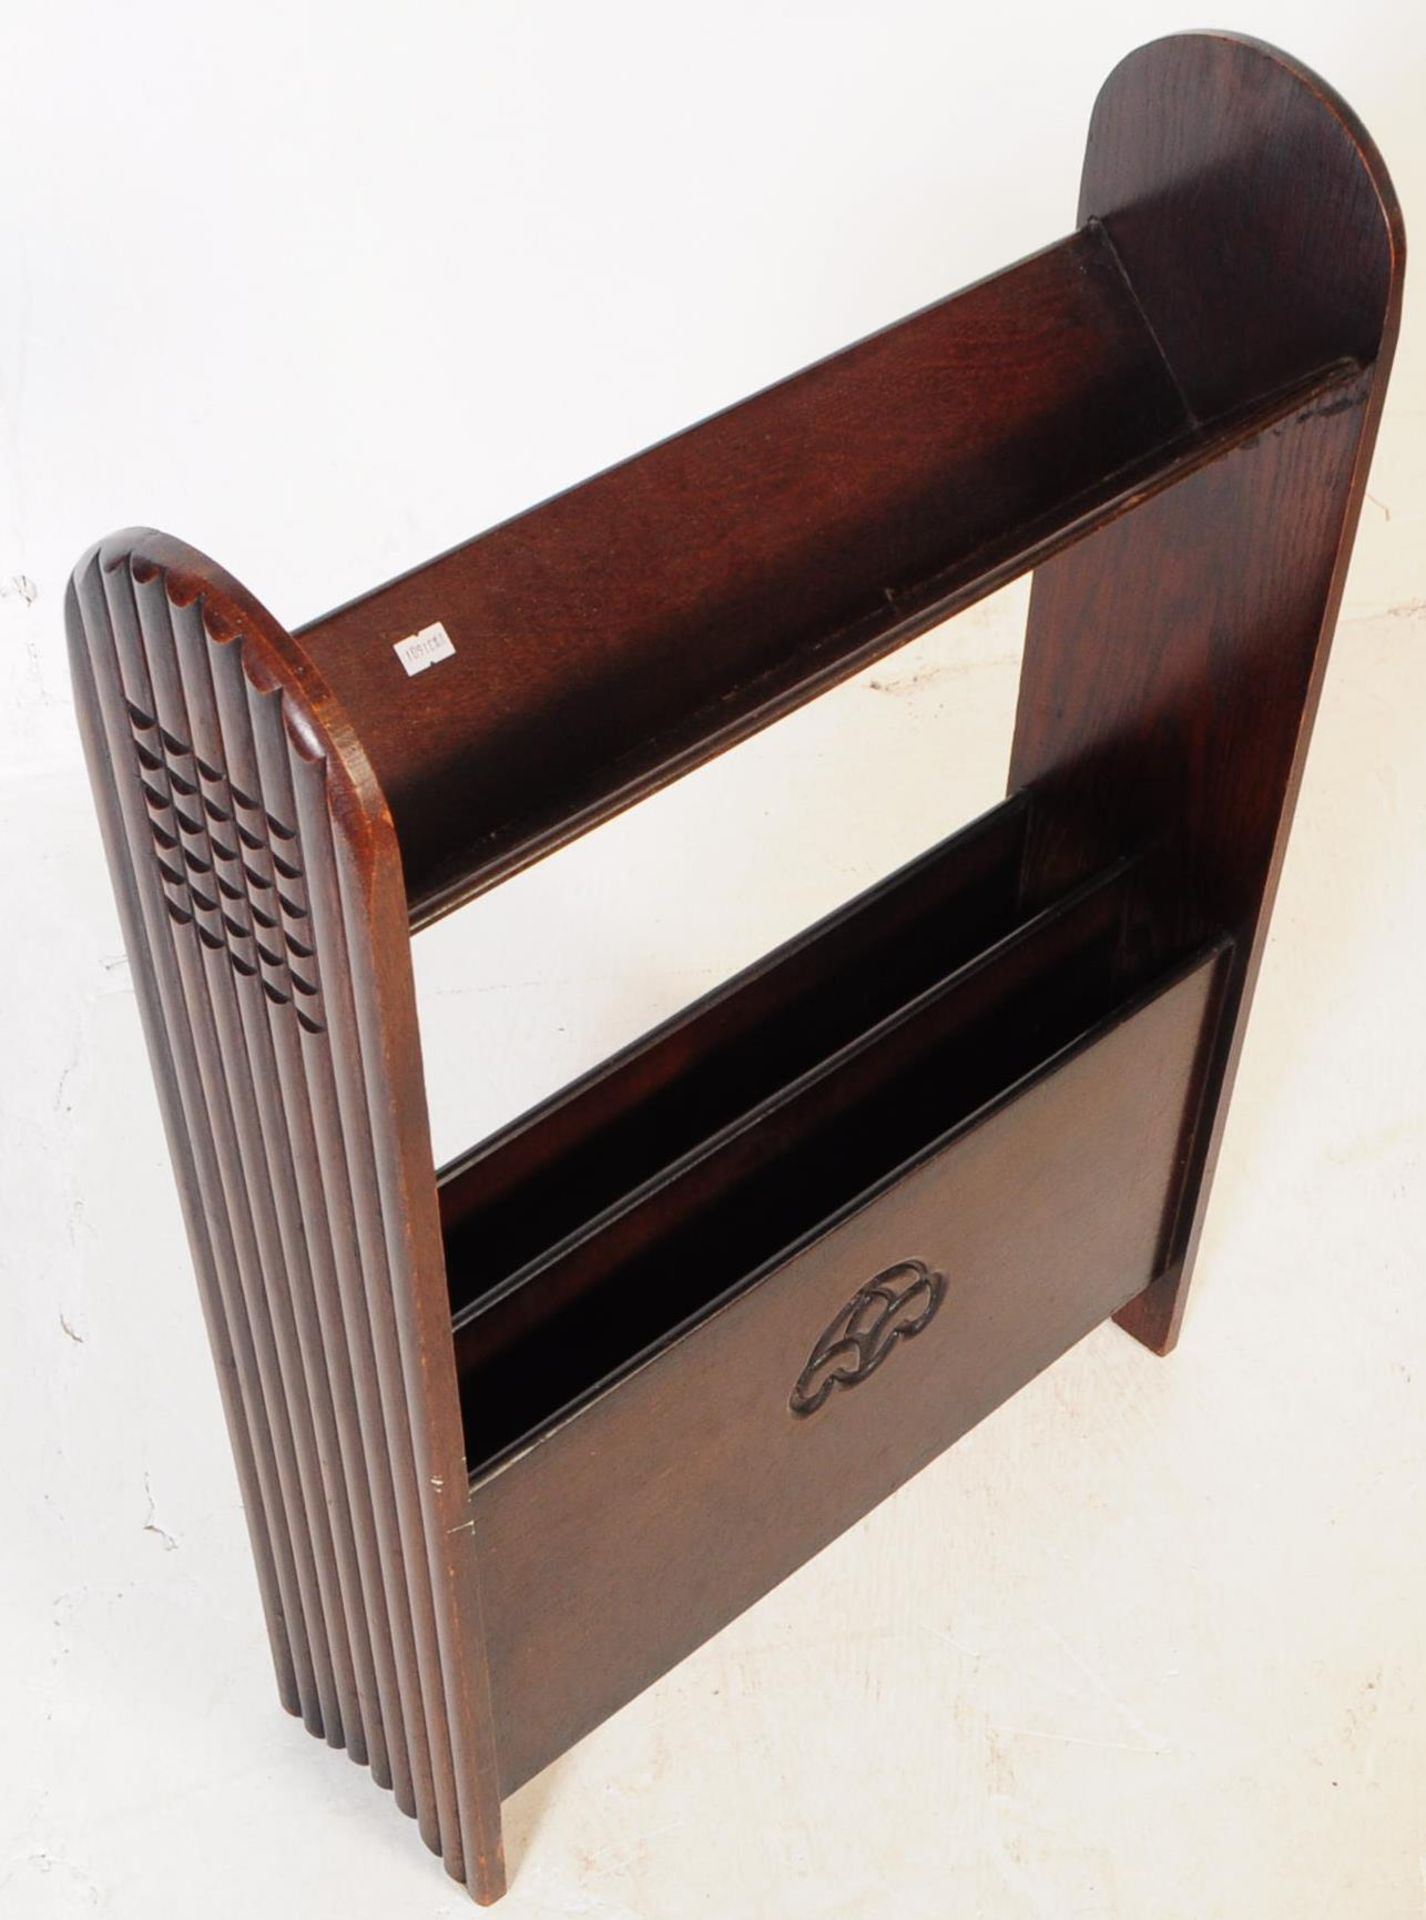 EARLY 20TH CENTURY ART DECO MAGAZINE RACK / STAND - Image 3 of 6